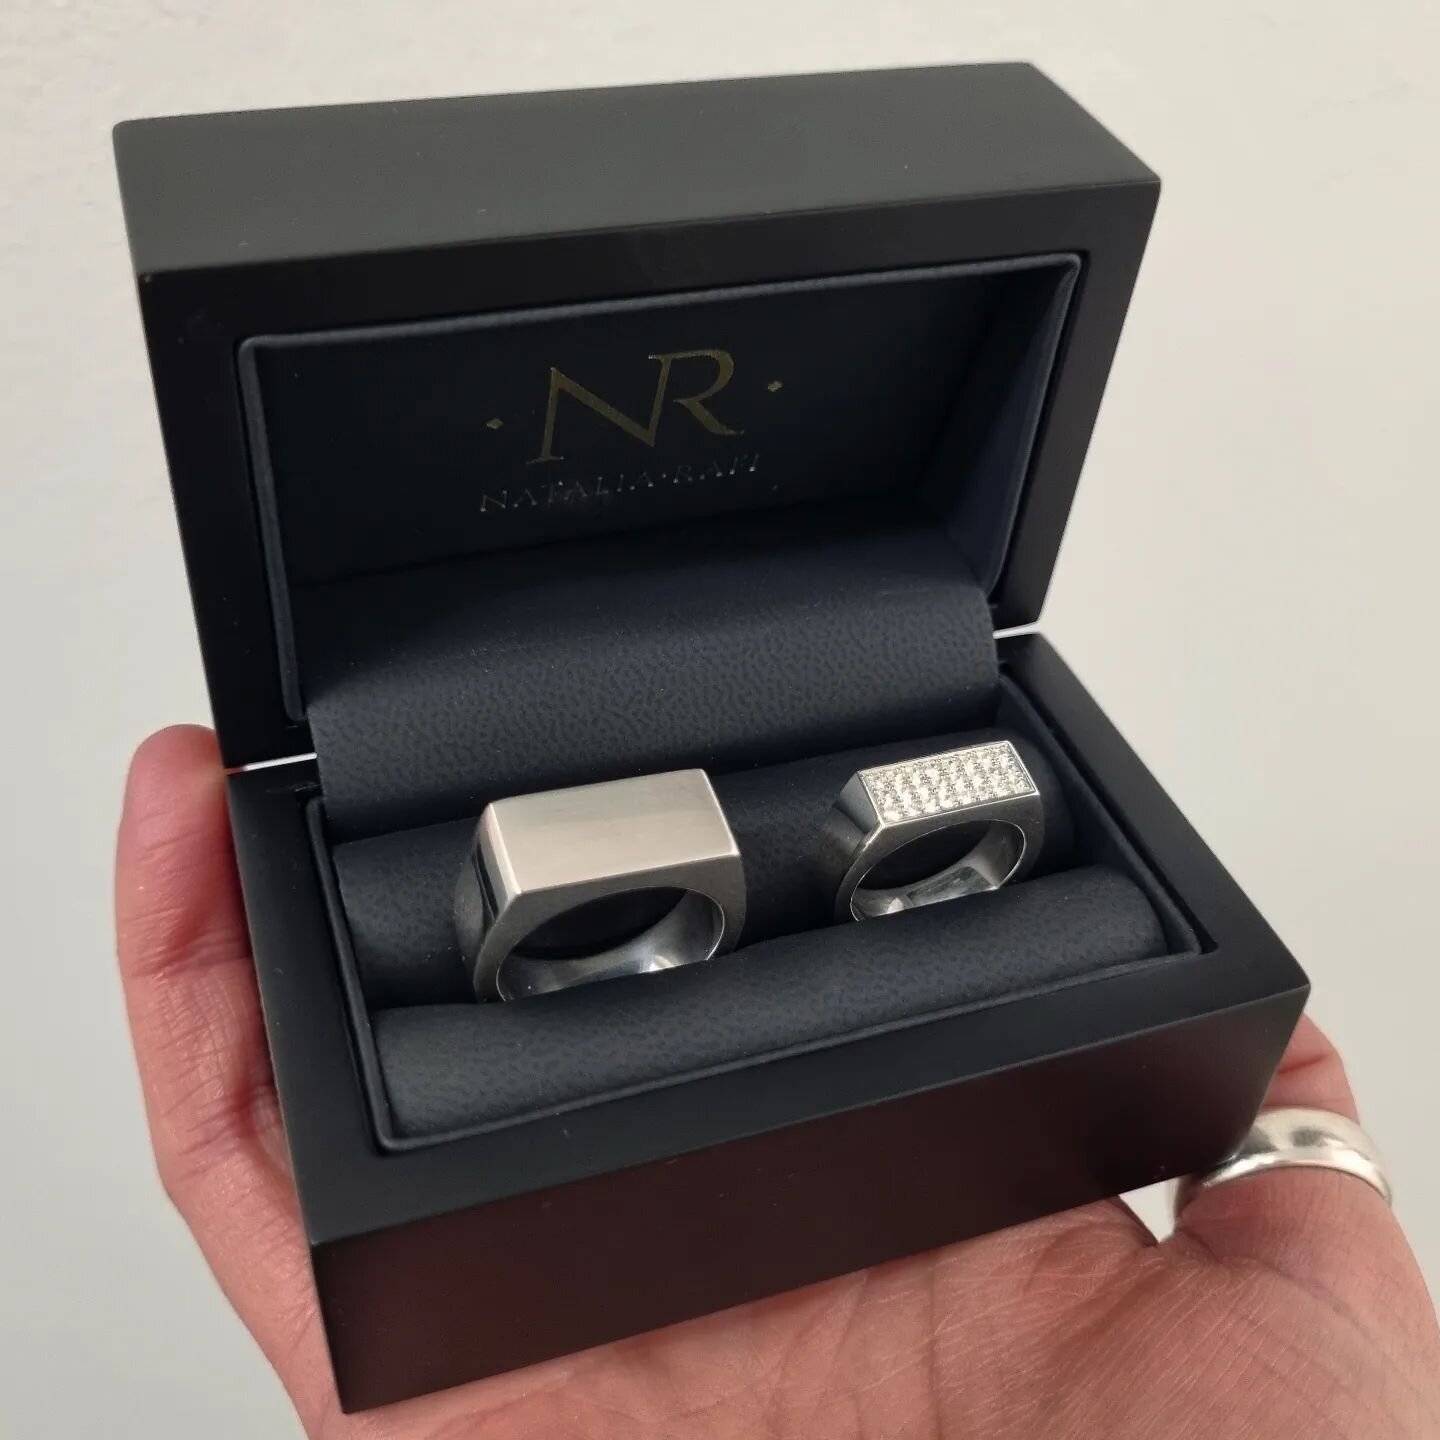 Natalia Rafi wedding rings - it's okay to be different. 

To view our full range click the link in our bio.

Have a great bank holiday.xx